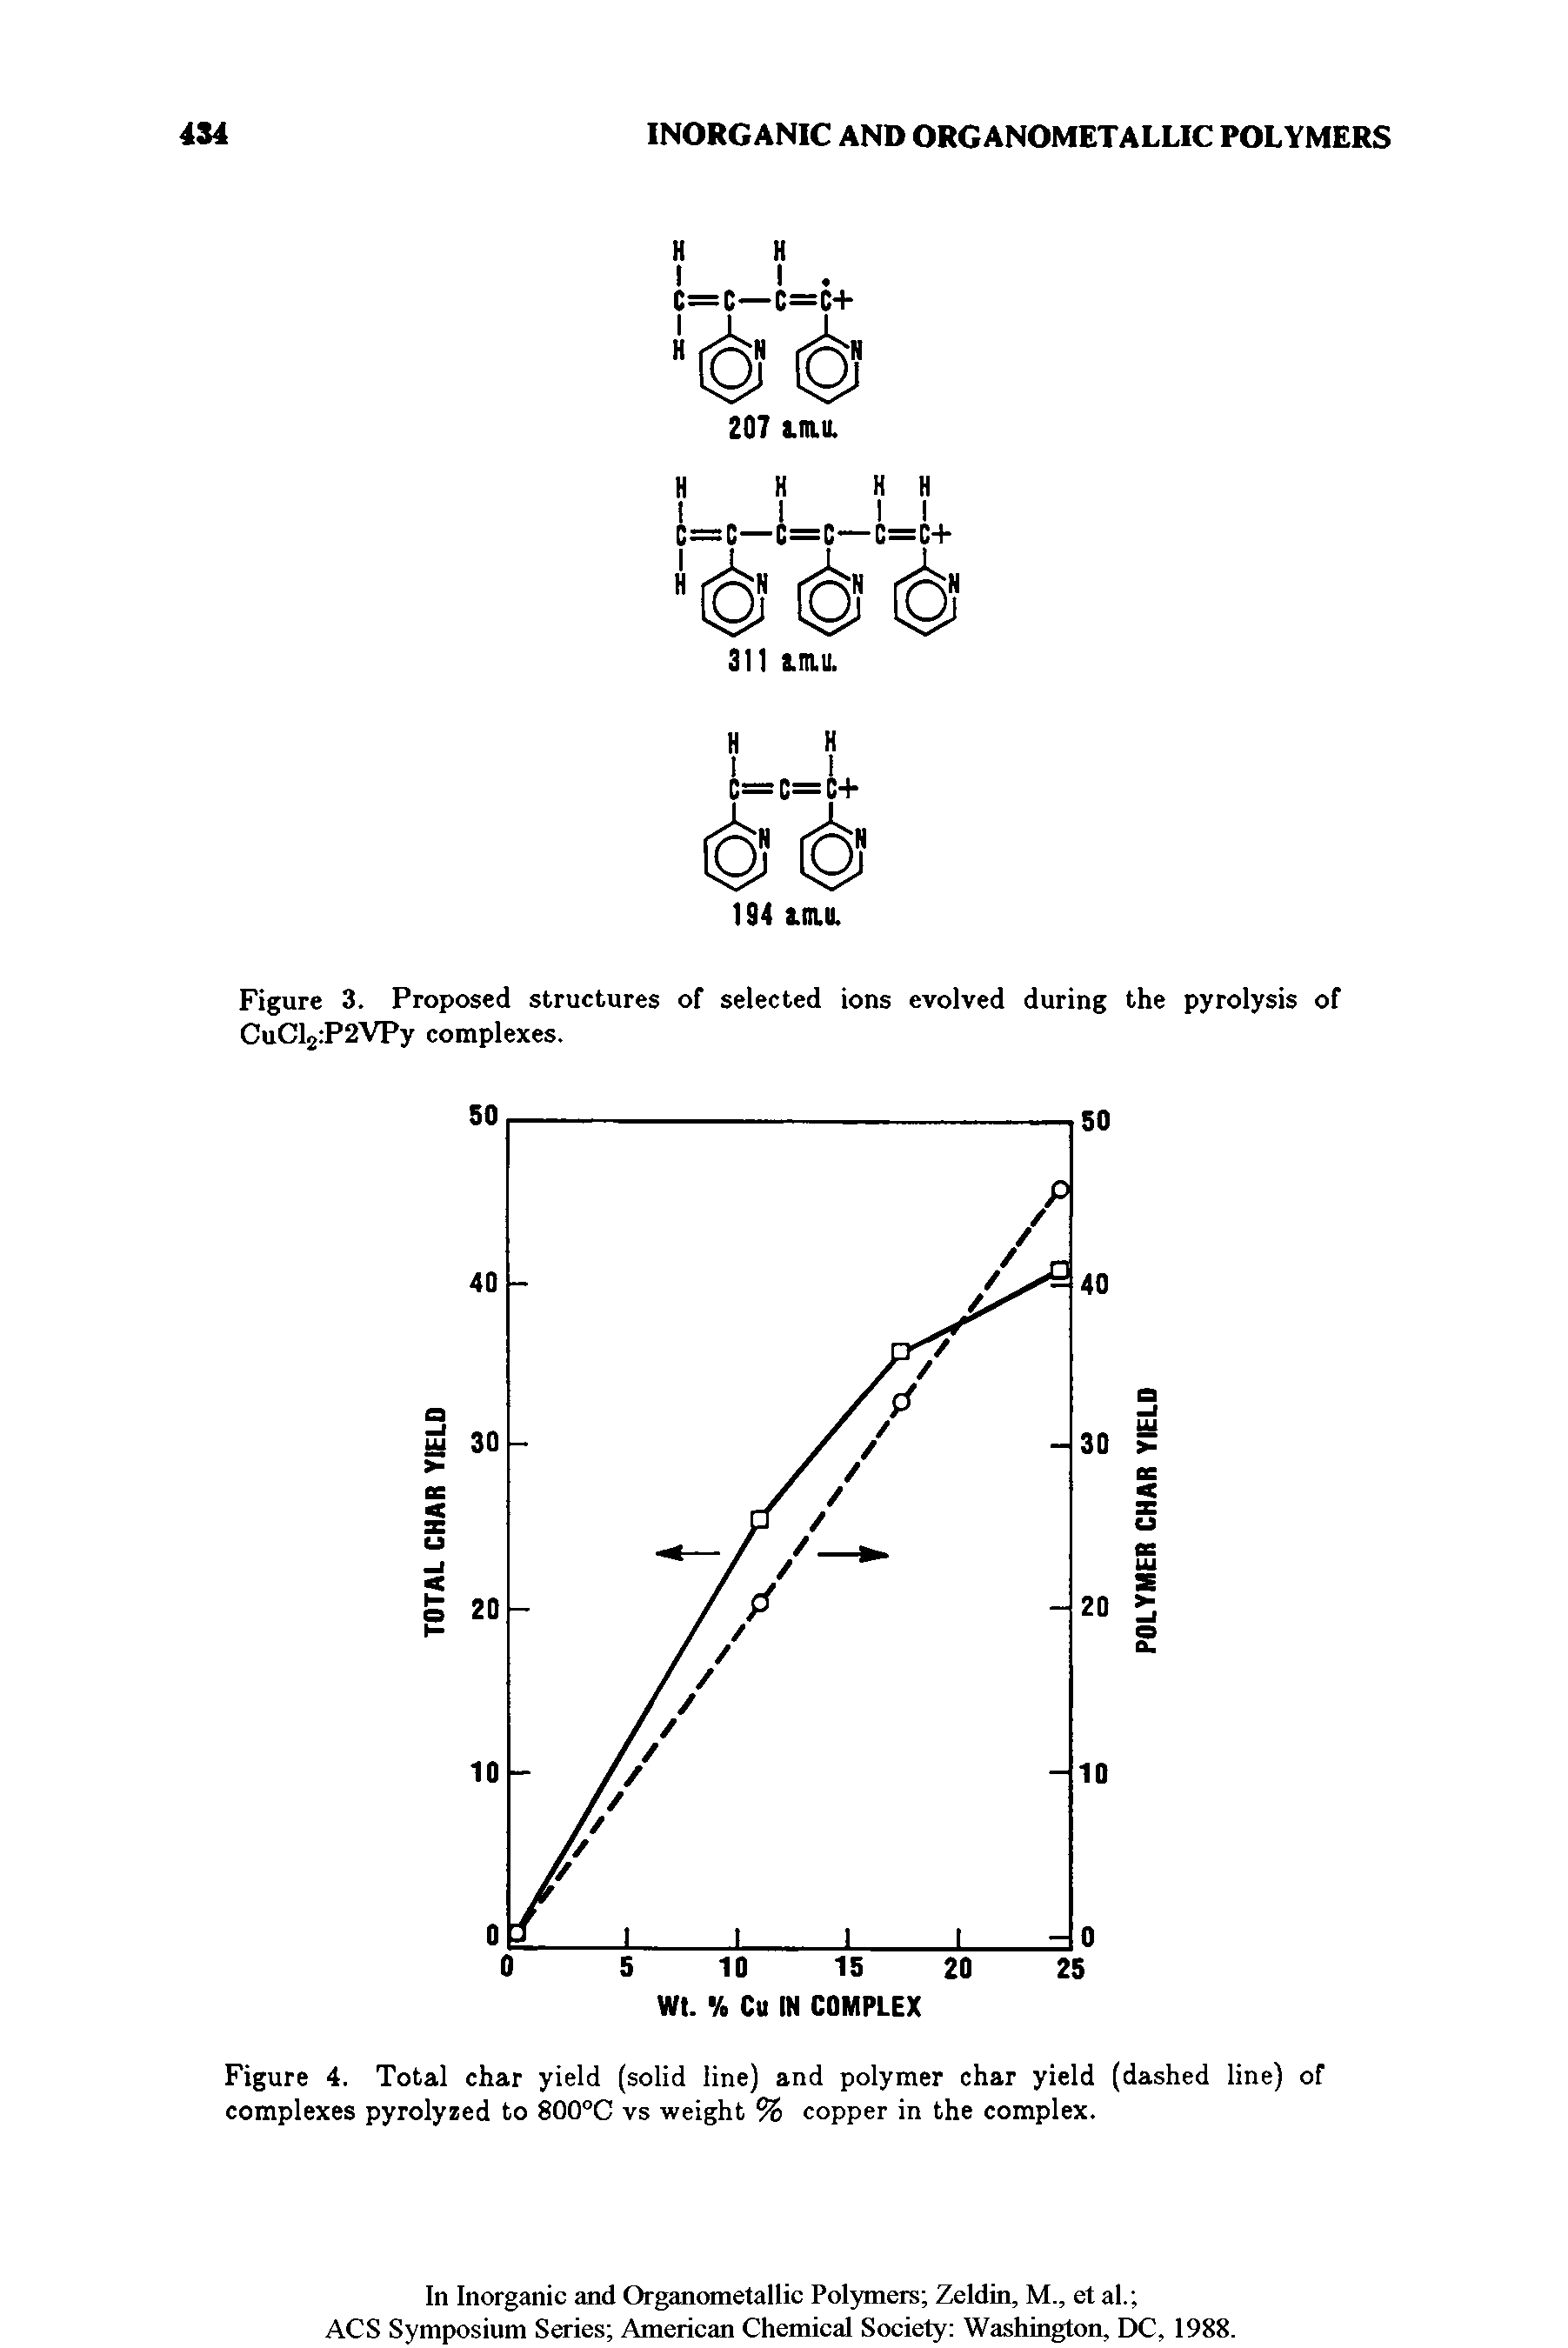 Figure 4. Total char yield (solid line) and polymer char yield (dashed line) of complexes pyrolyzed to 800°C vs weight % copper in the complex.